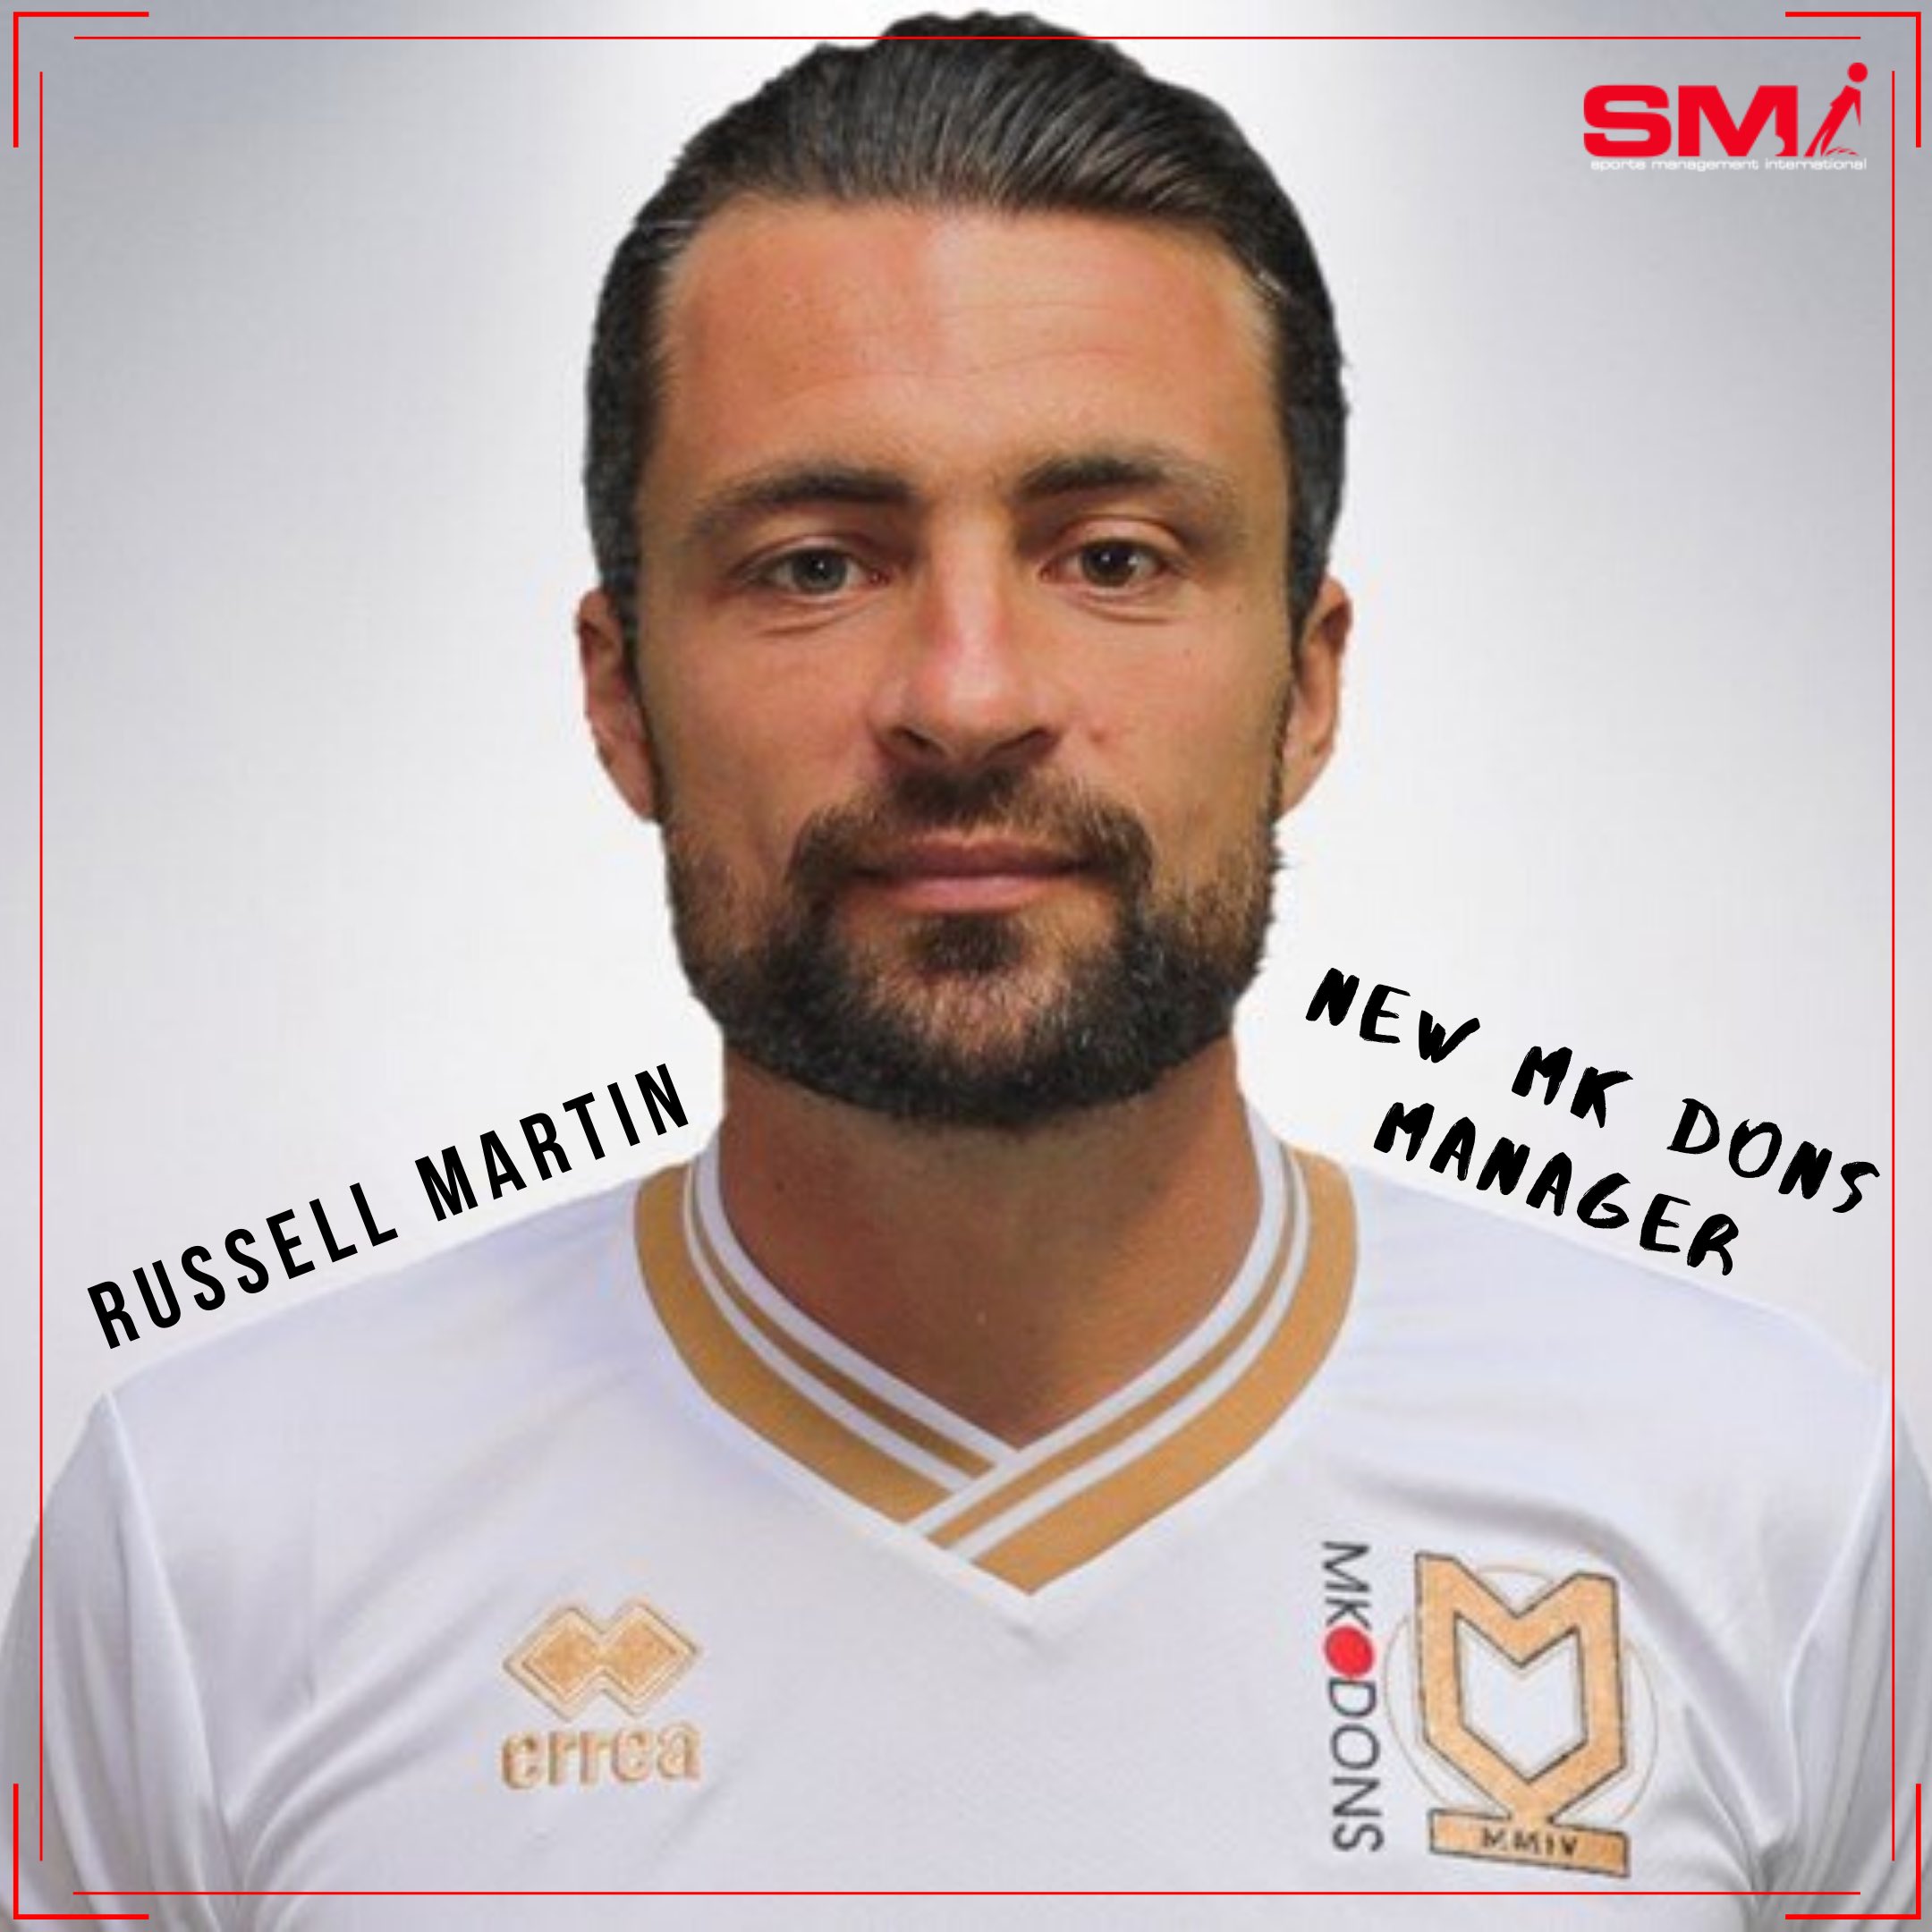 Russell Martin new MK Dons manager